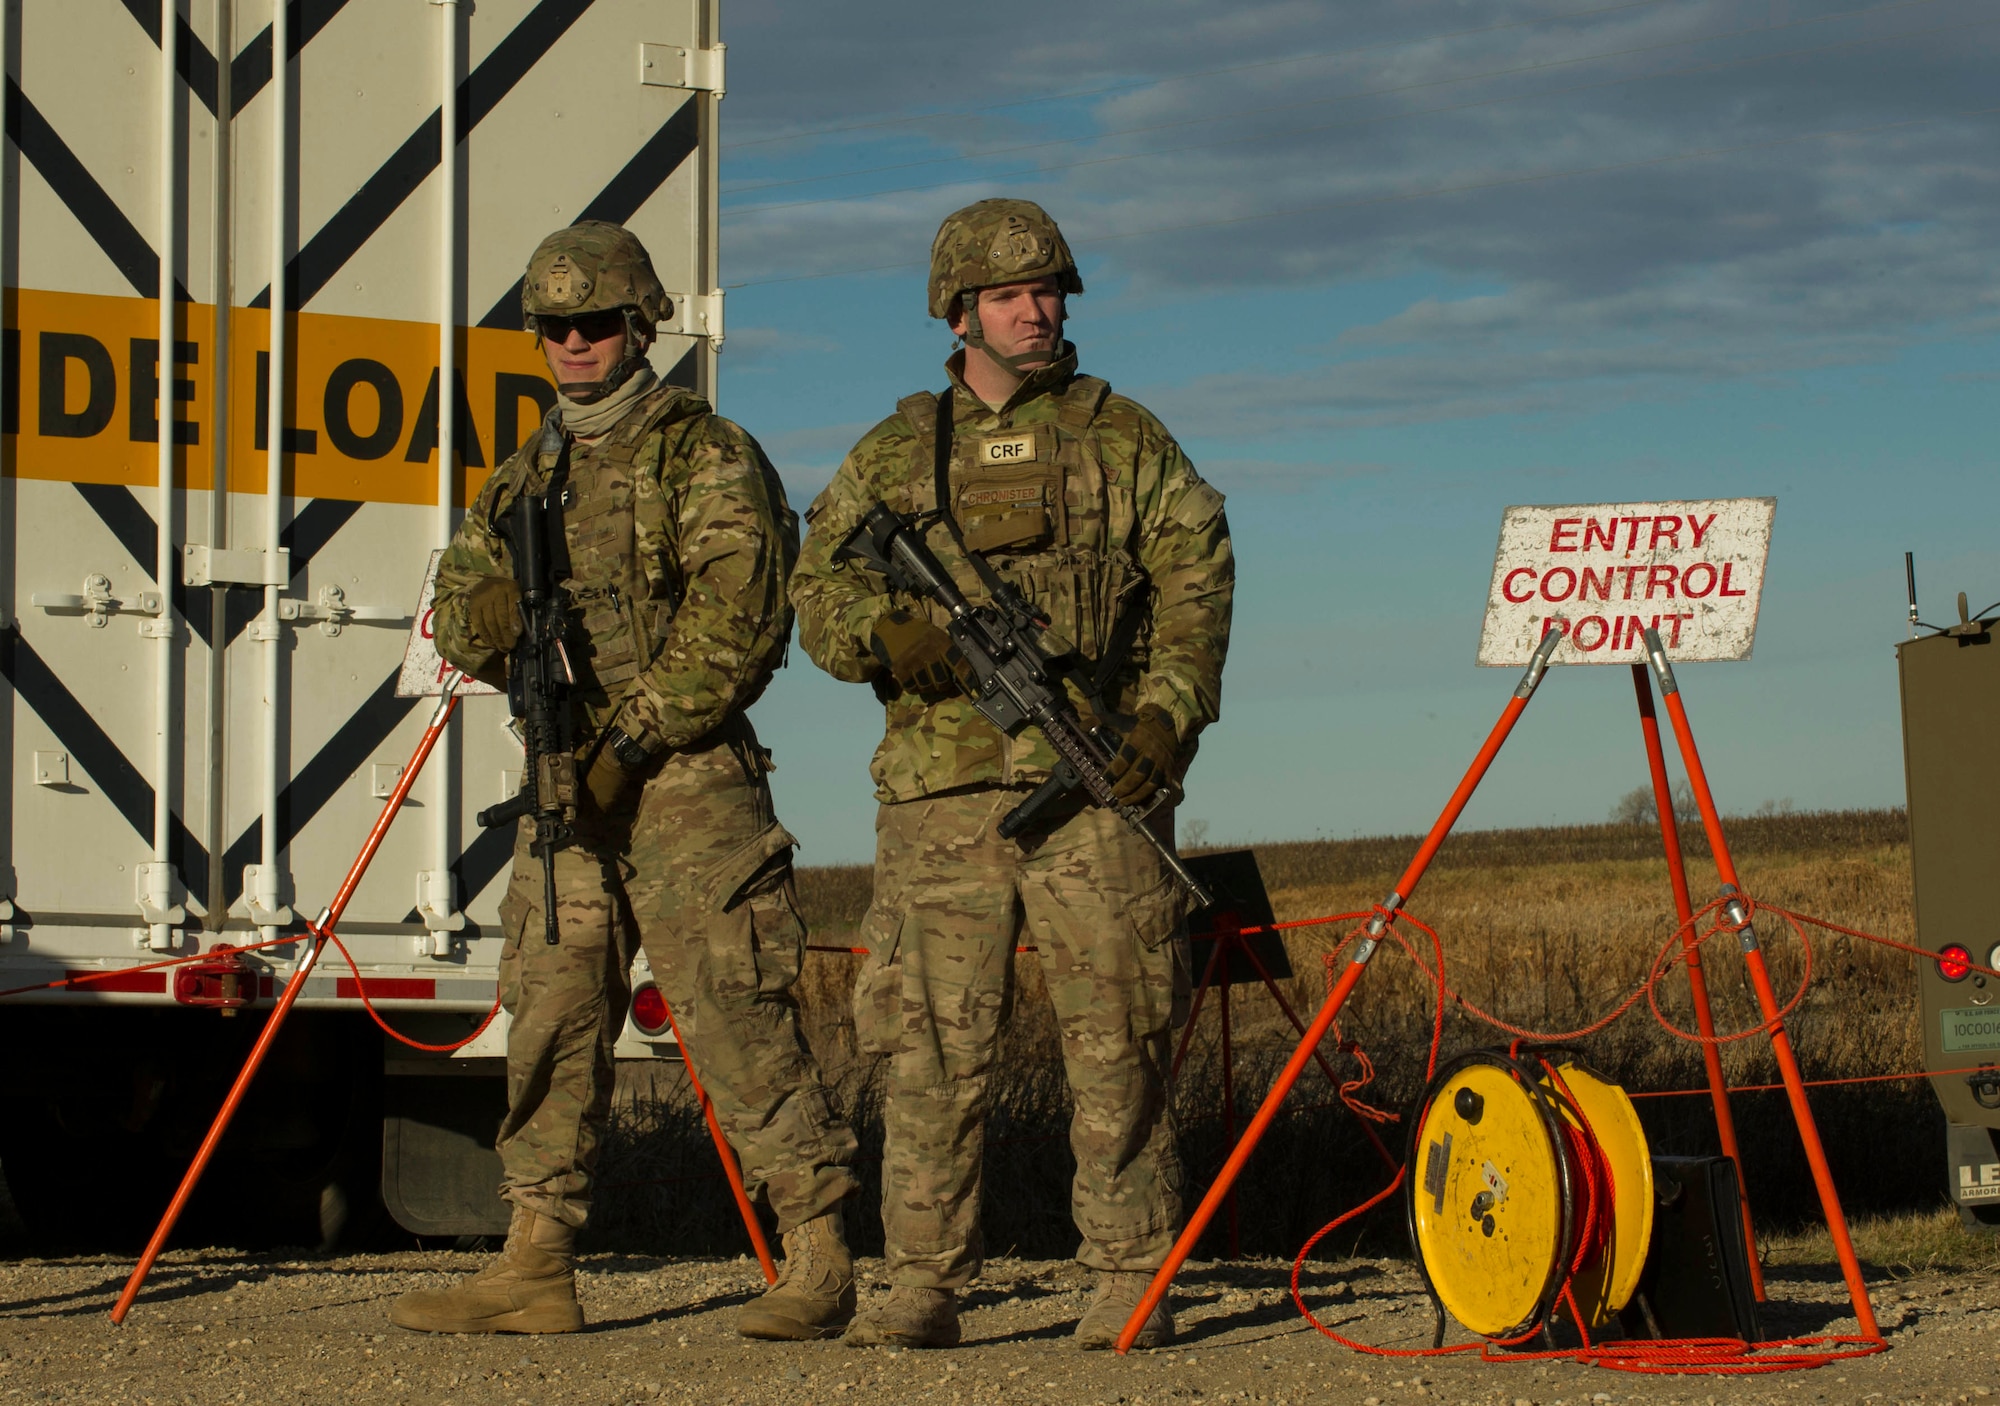 (From left) Senior Airman Dustin Silc and Staff Sgt. Tyler Chronister, 791st Missile Security Forces Squadron convoy response force members, provide security at an entry control point during a recapture and recovery exercise at the missile complex, N.D., Nov. 16, 2016. A cordon was set as part of a simulated hostile takeover training exercise. (U.S. Air Force photo/Senior Airman Apryl Hall)